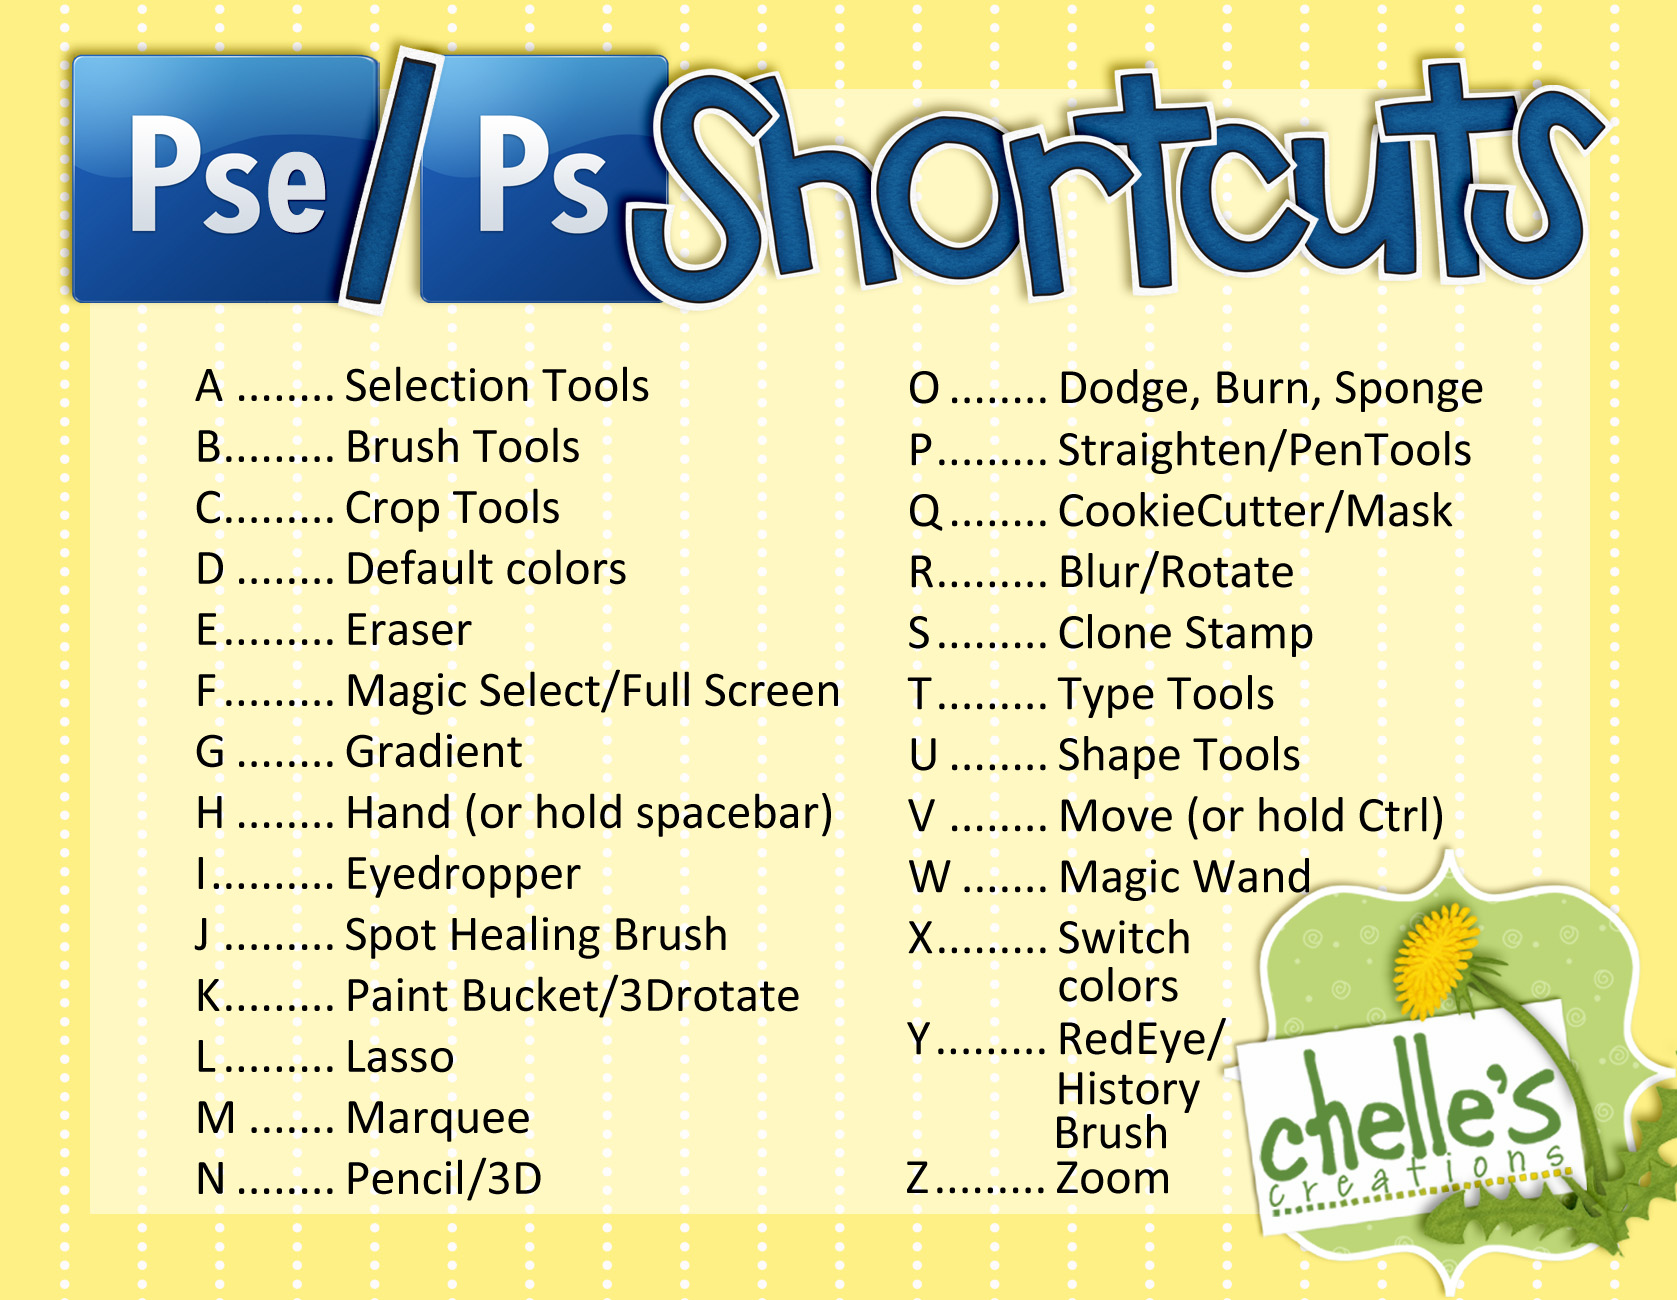 Photoshop And Pse Shortcut Keys Free Printable Card Chelle S